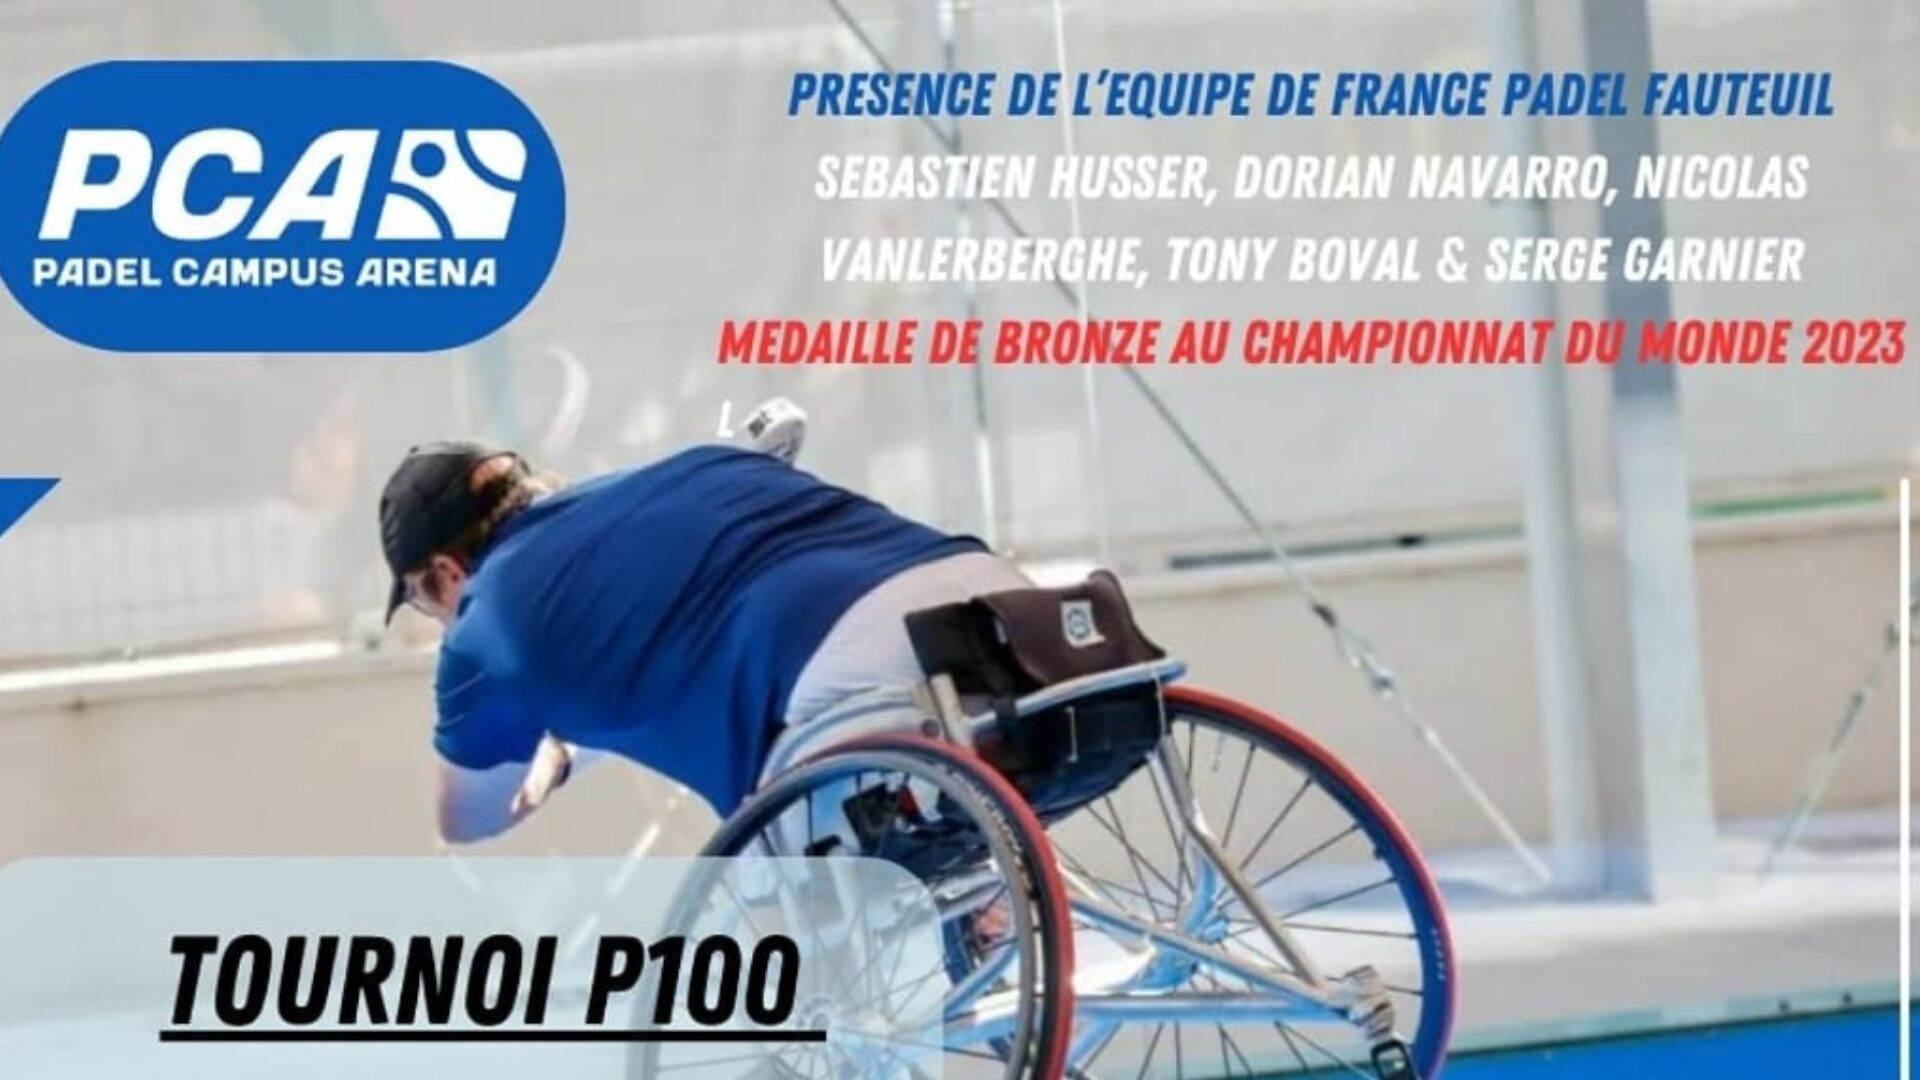 Padel-armchair – A P100 to Padel Campus Arena with 11 of the 20 best French people!